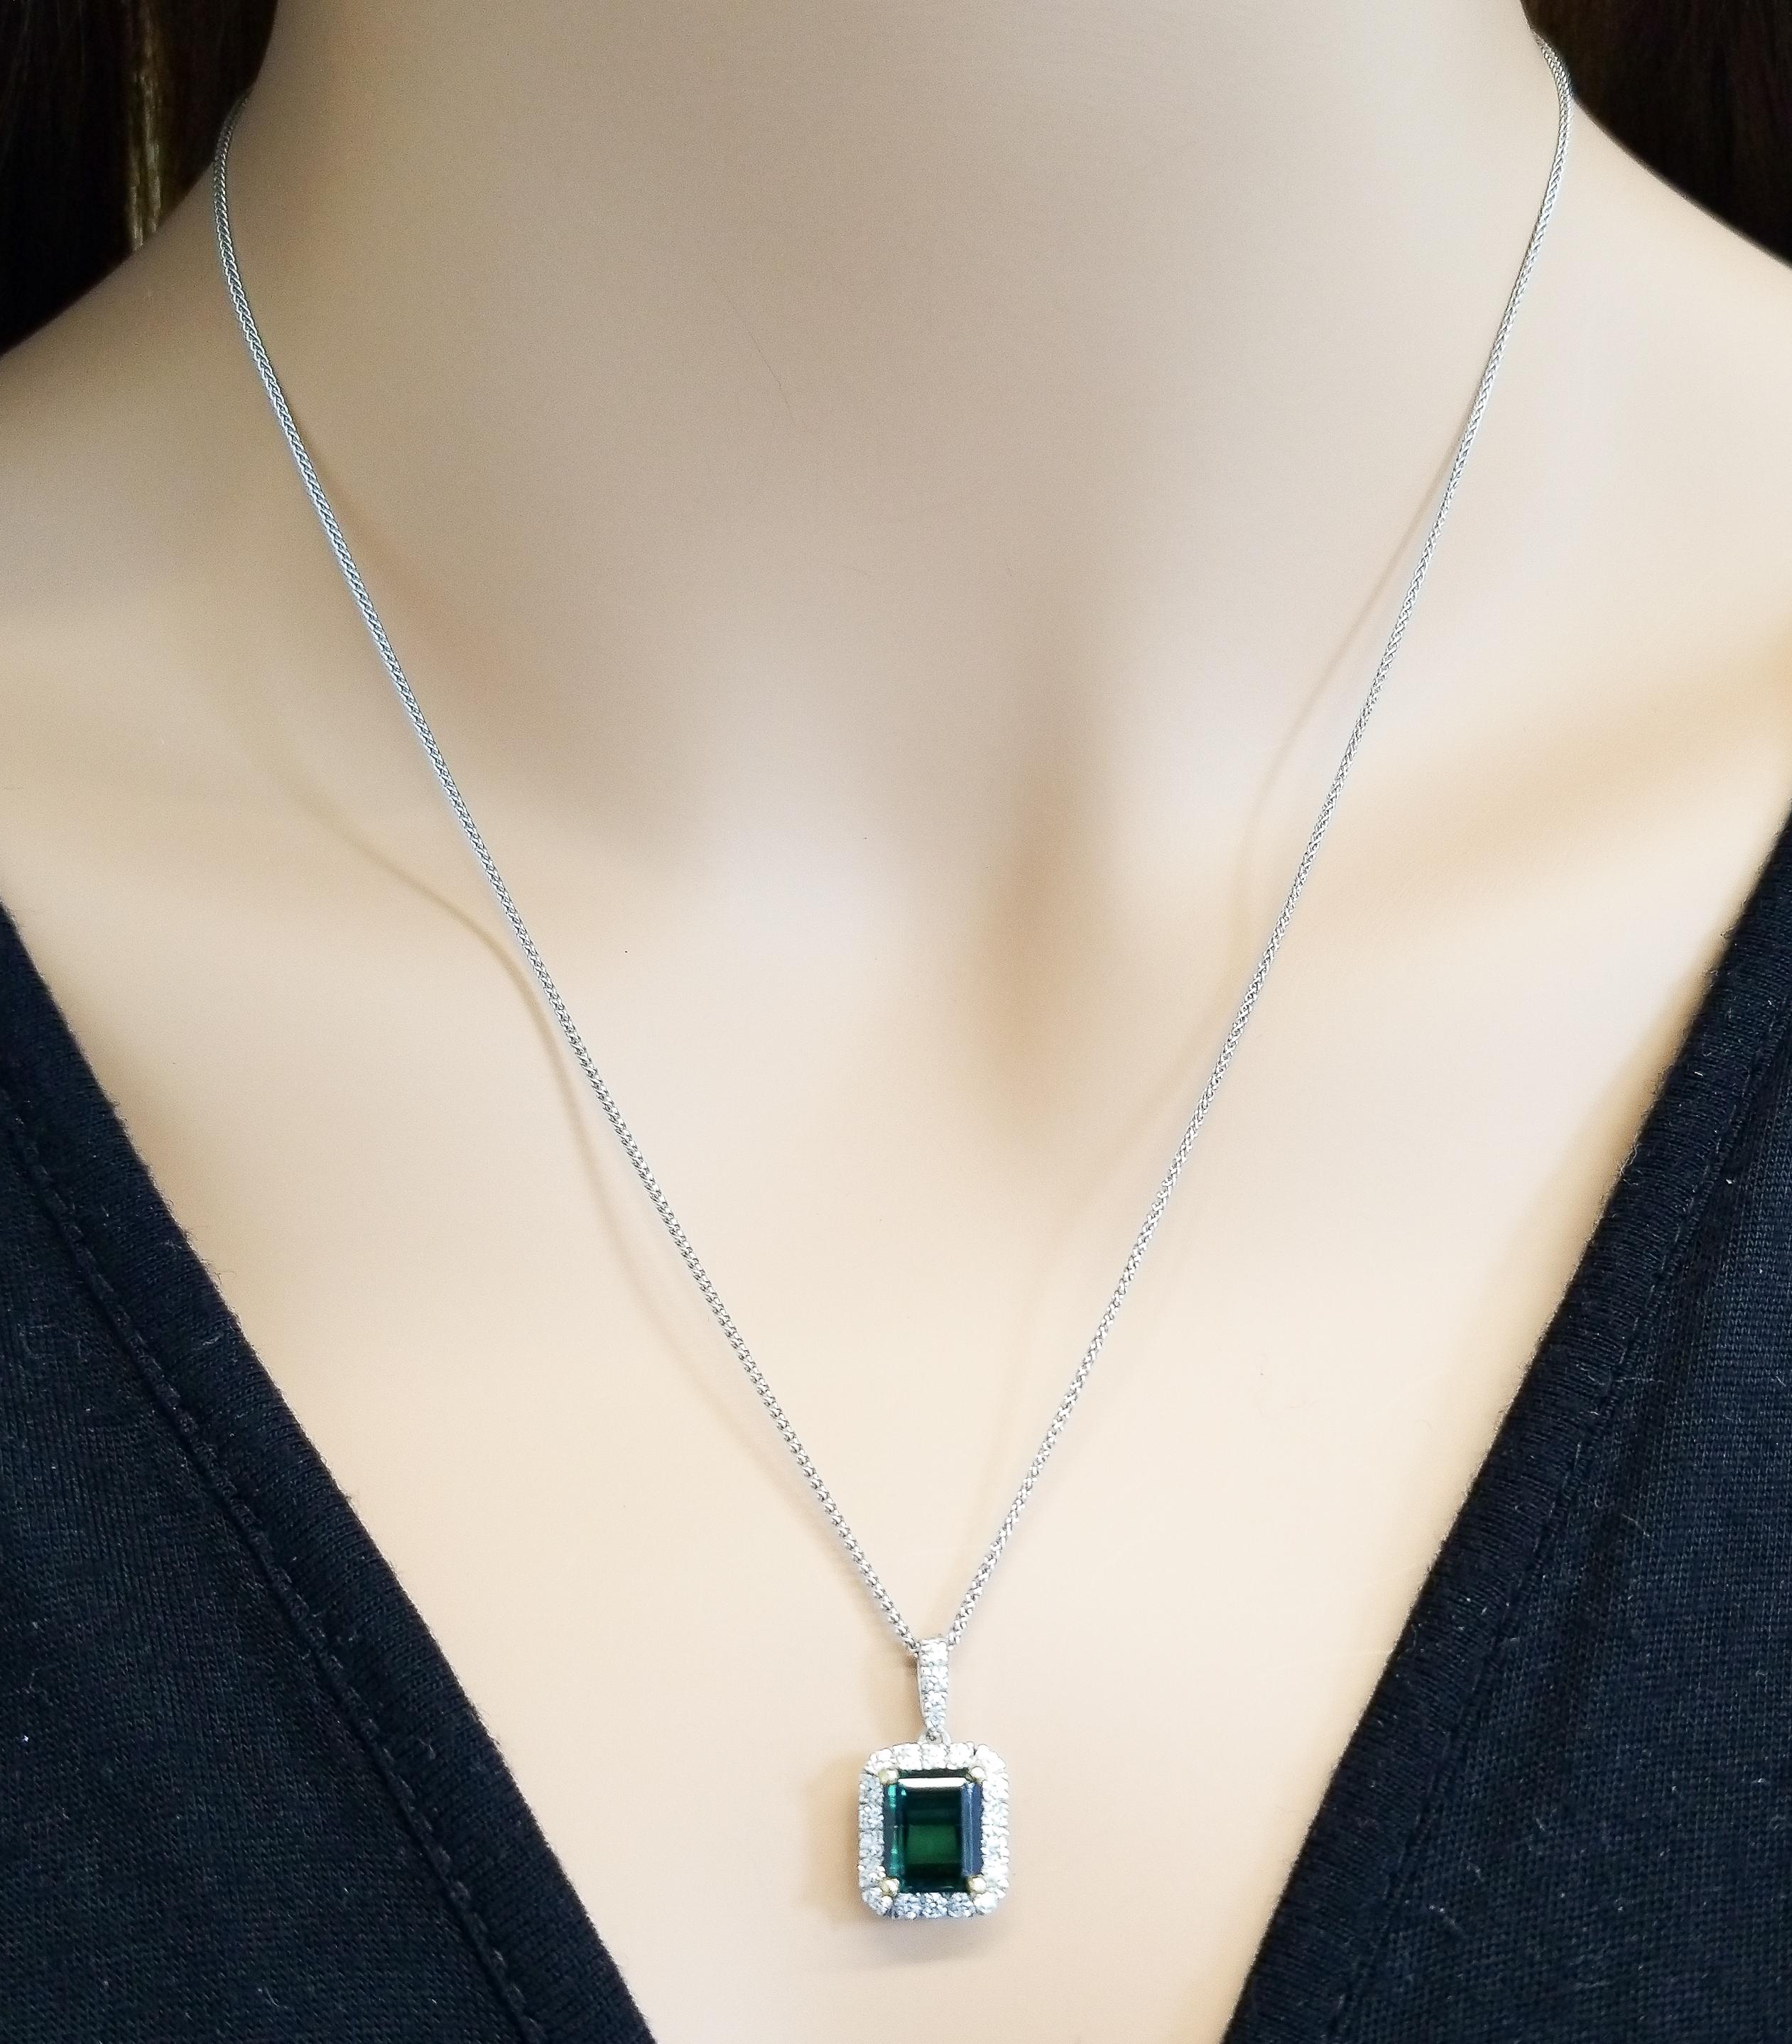 Finish your look with a touch of elegance wearing this gorgeous geometric pendant. One 2.85 carat emerald cut bluish-green tourmaline takes center stage in rich yellow gold accented prongs and is surrounded by round brilliant cut diamonds that are